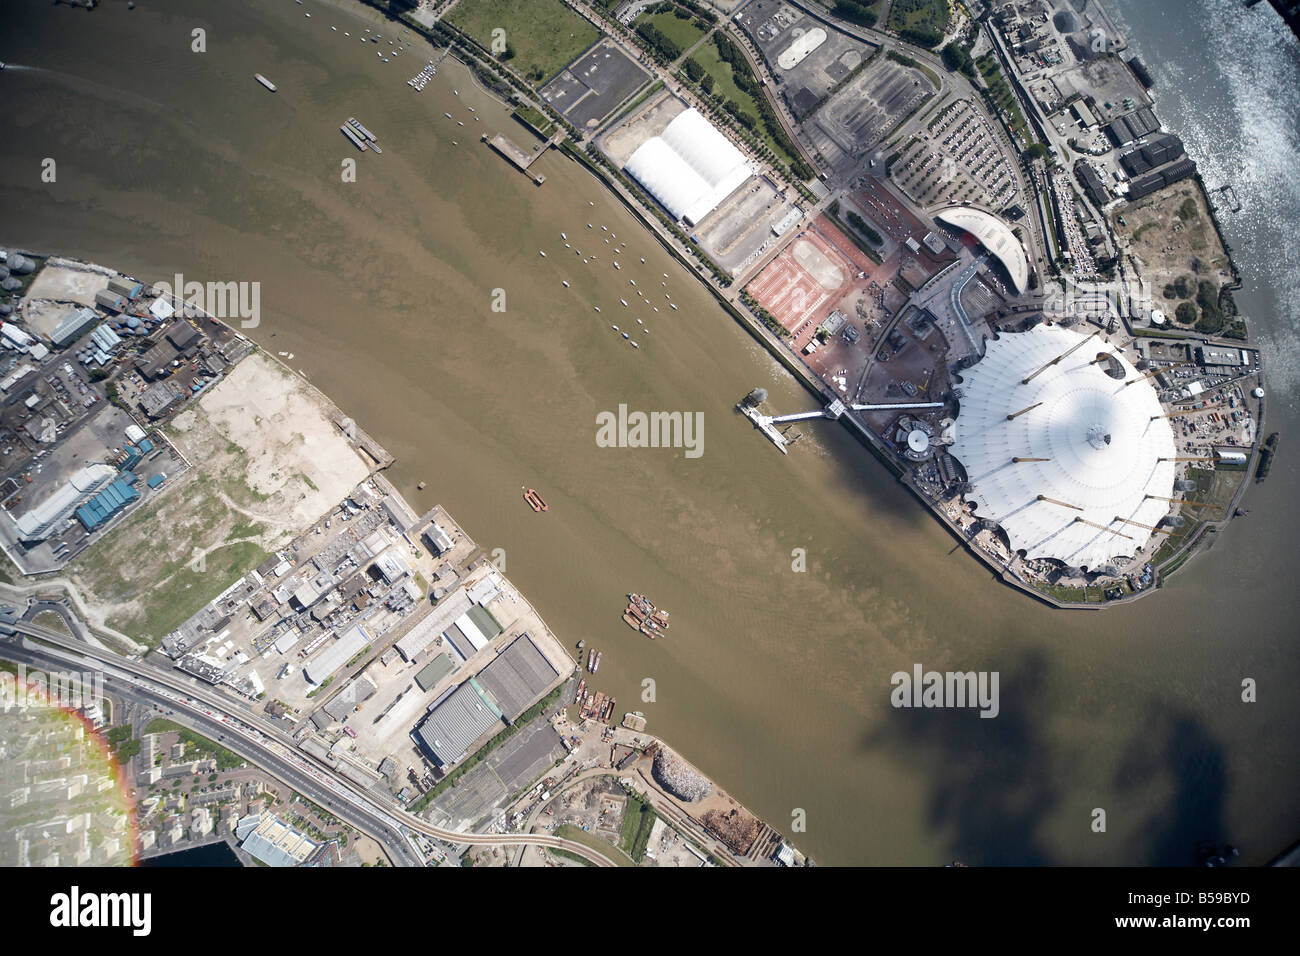 Aerial view south west of 02 Stadium North Greenwich River Thames Thames Wharf brewary Dock Road Canning Town London SE10 E16 UK Stock Photo